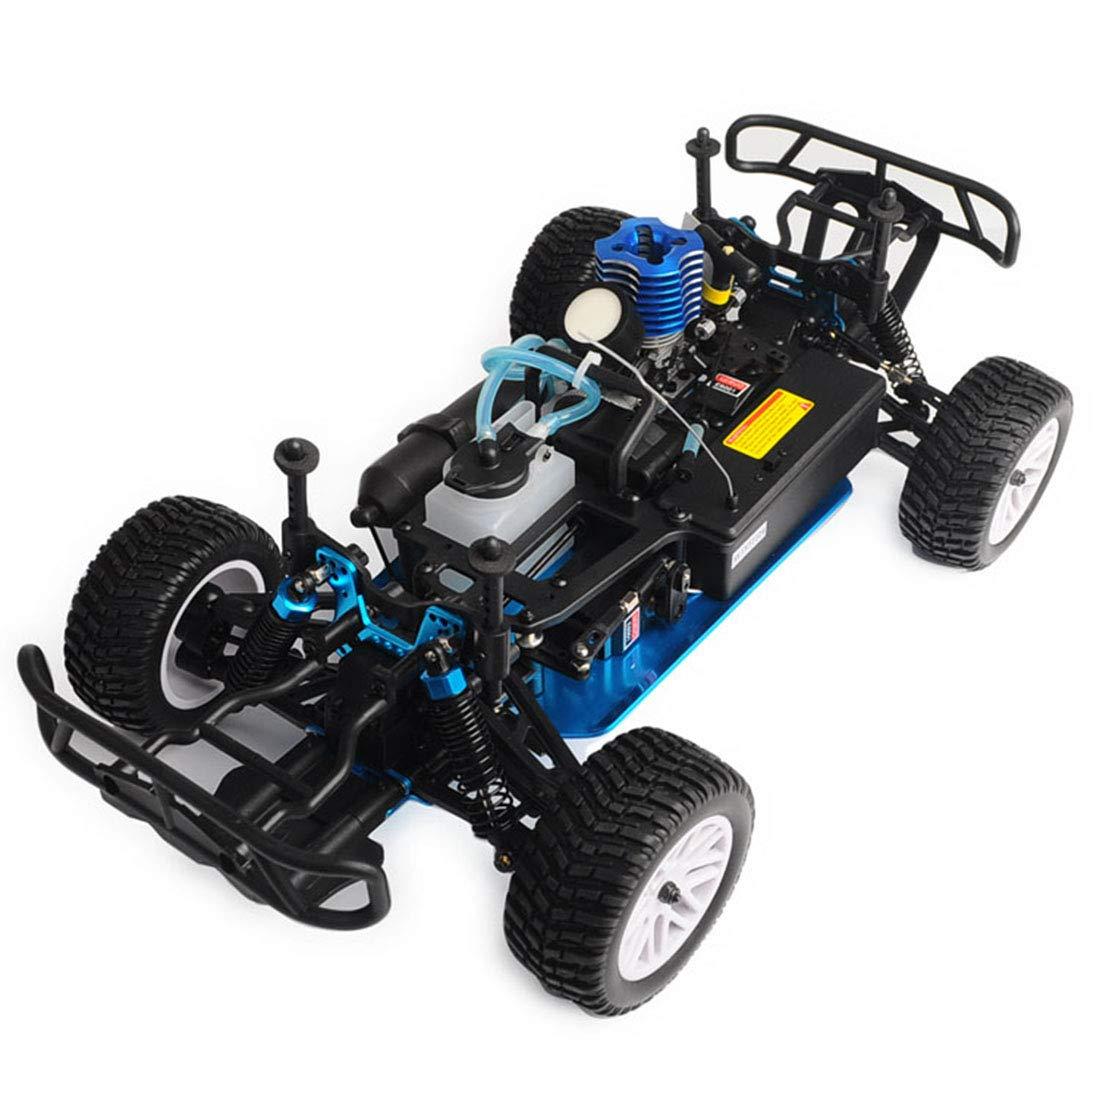 Nitro Remote Control Cars For Sale: Types of Nitro RC Cars